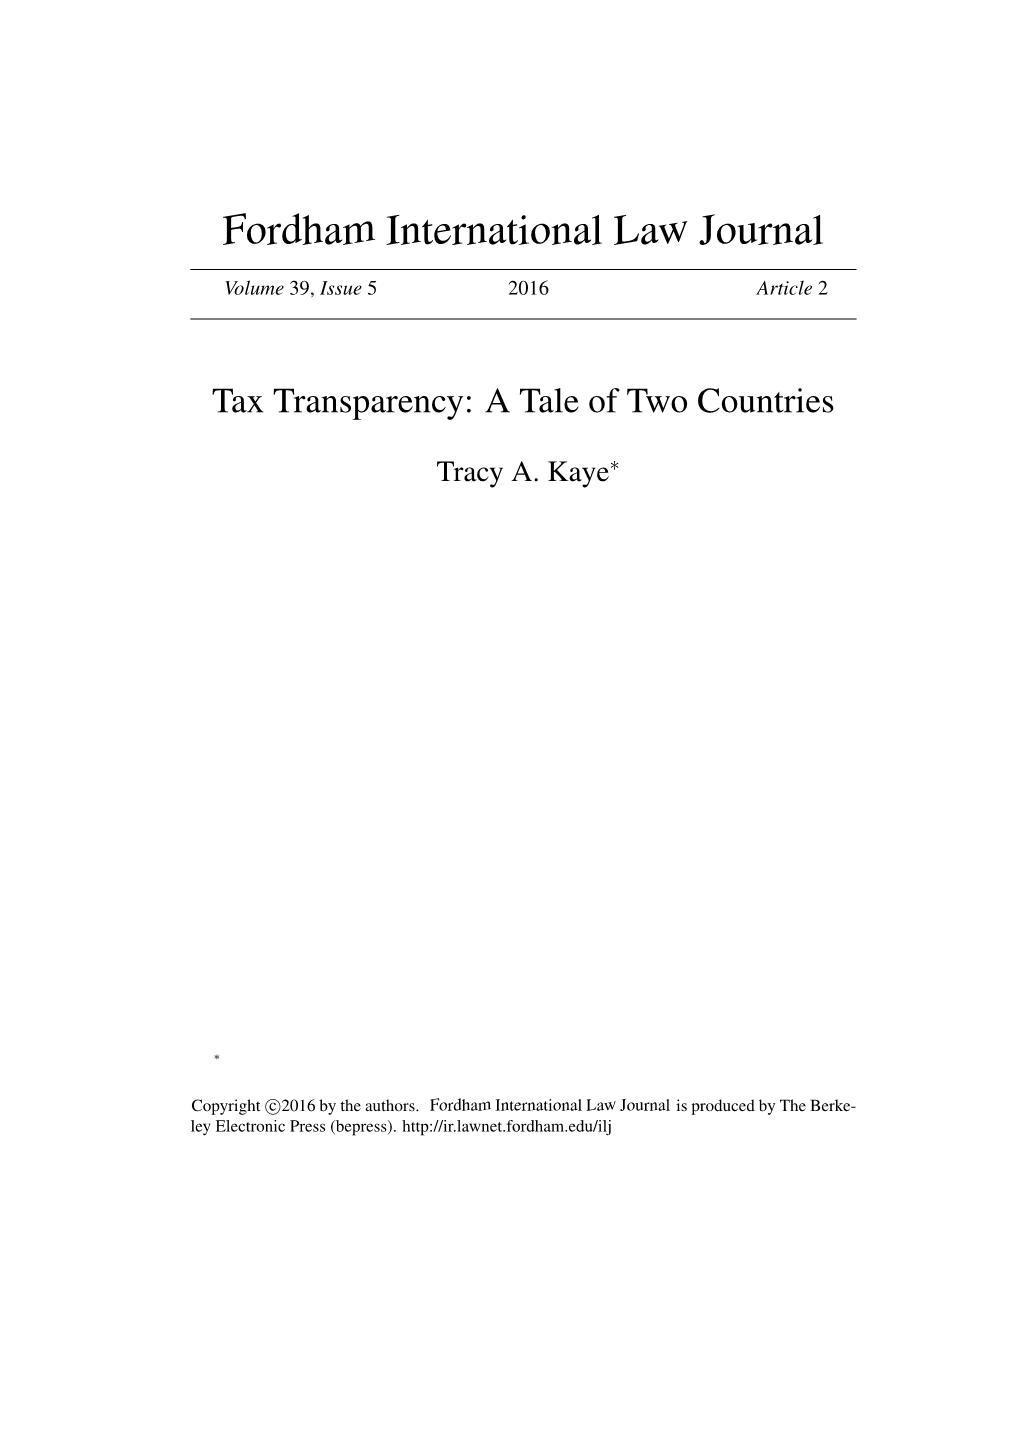 Tax Transparency: a Tale of Two Countries